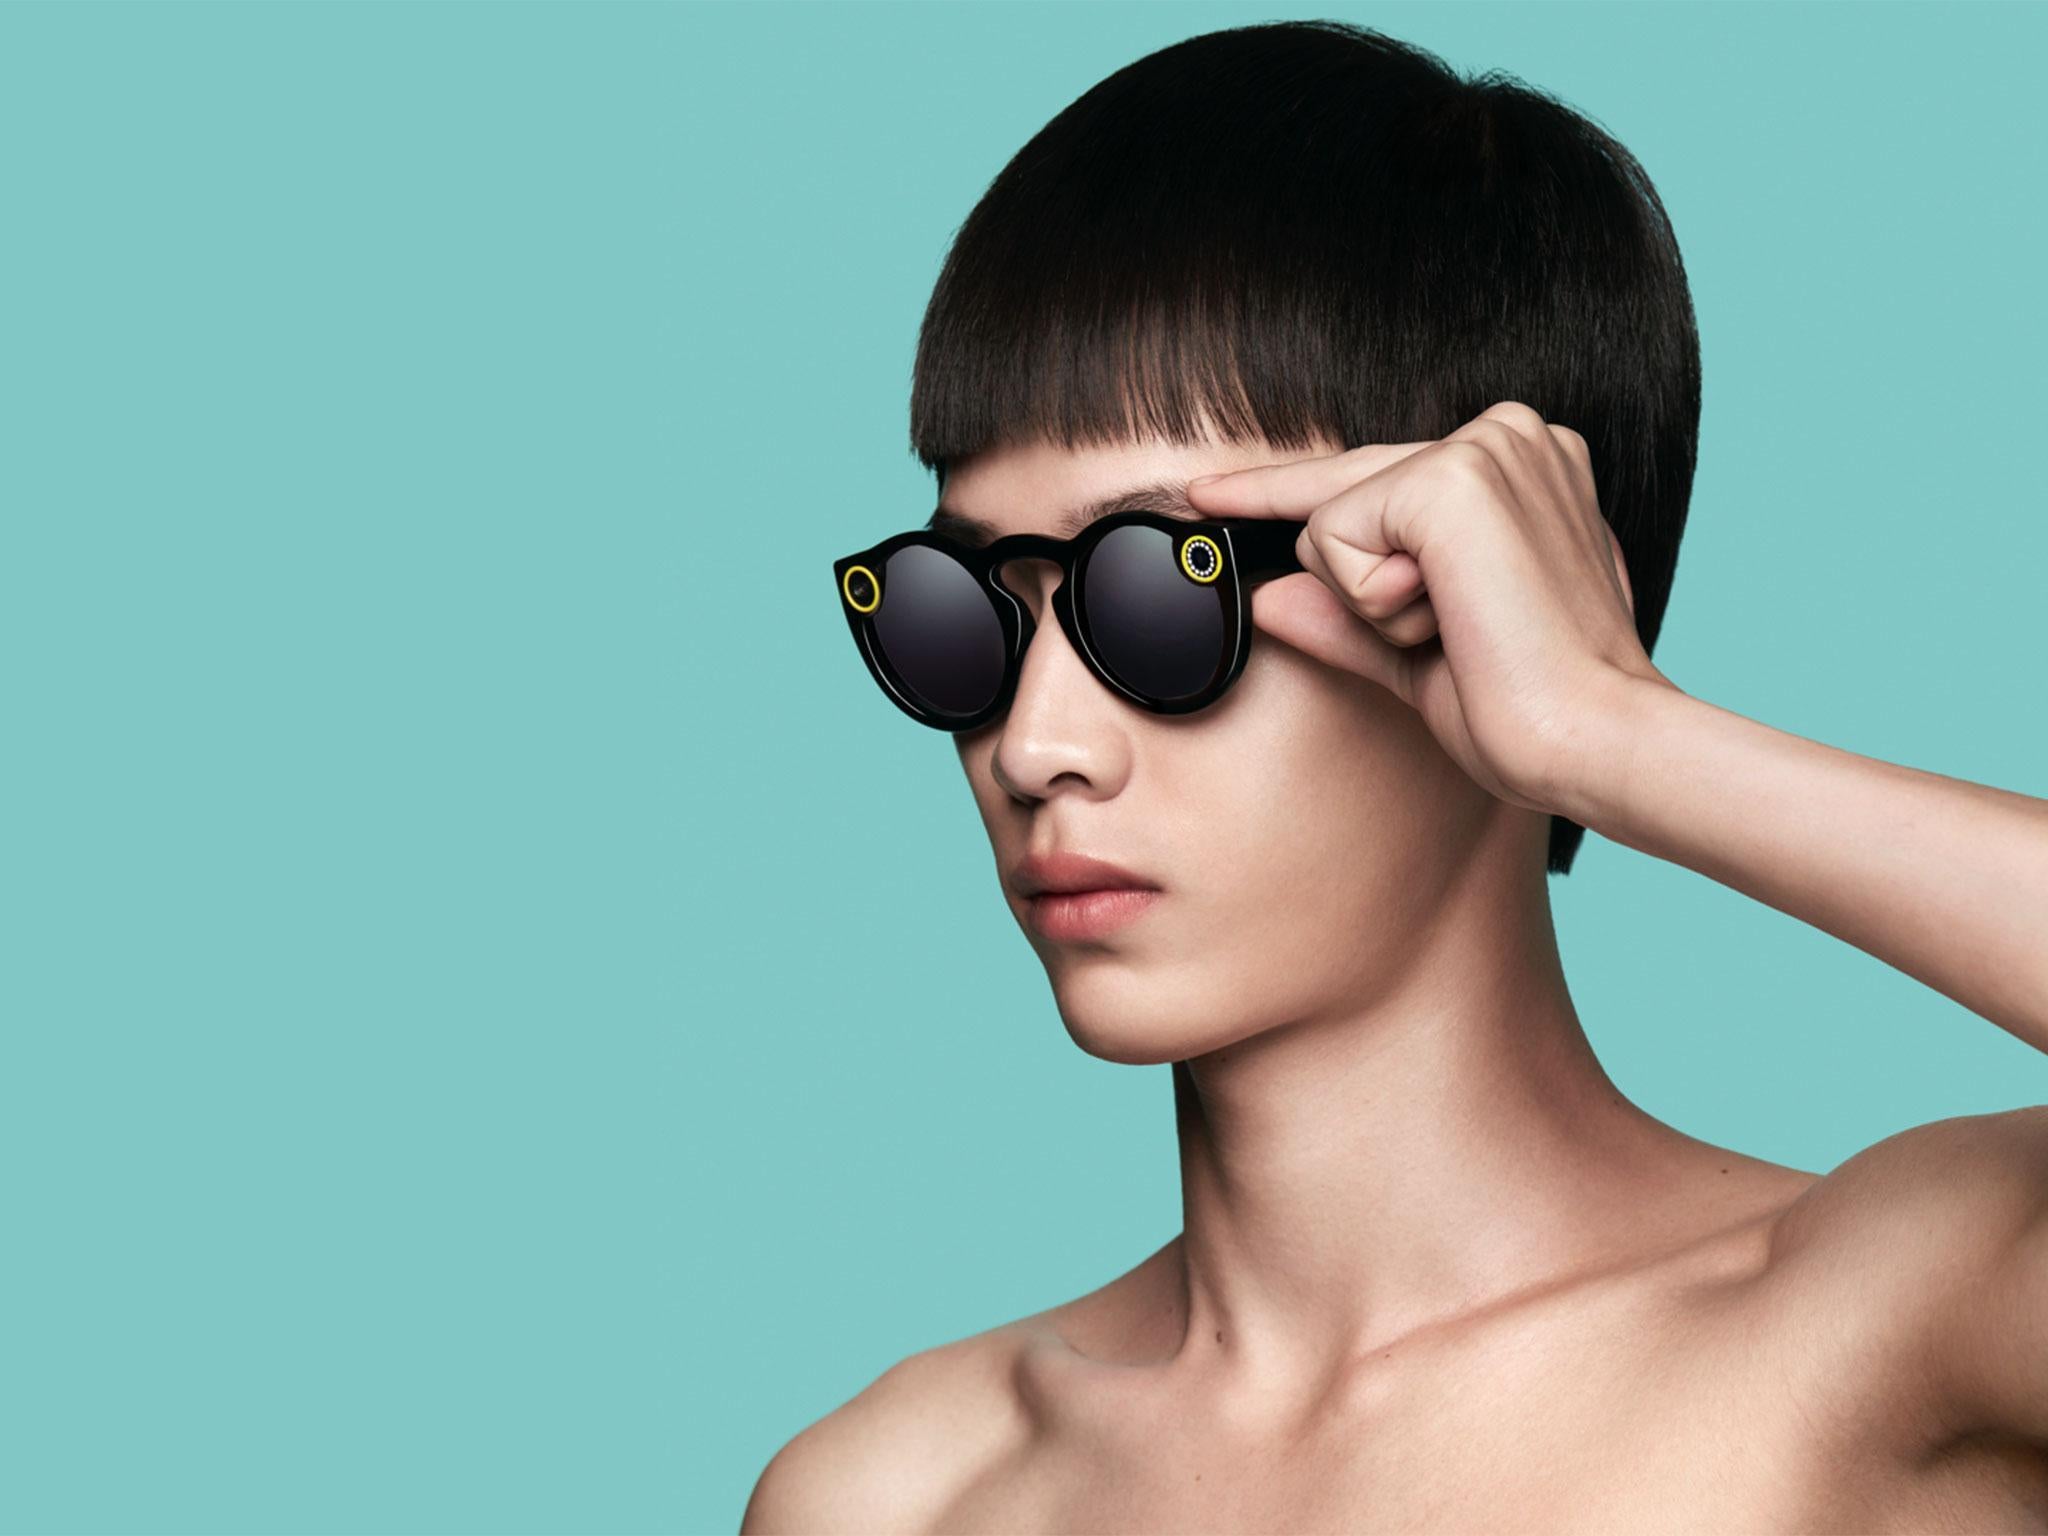 Spectacles will feature a wide-lens camera in a pair of sunglasses